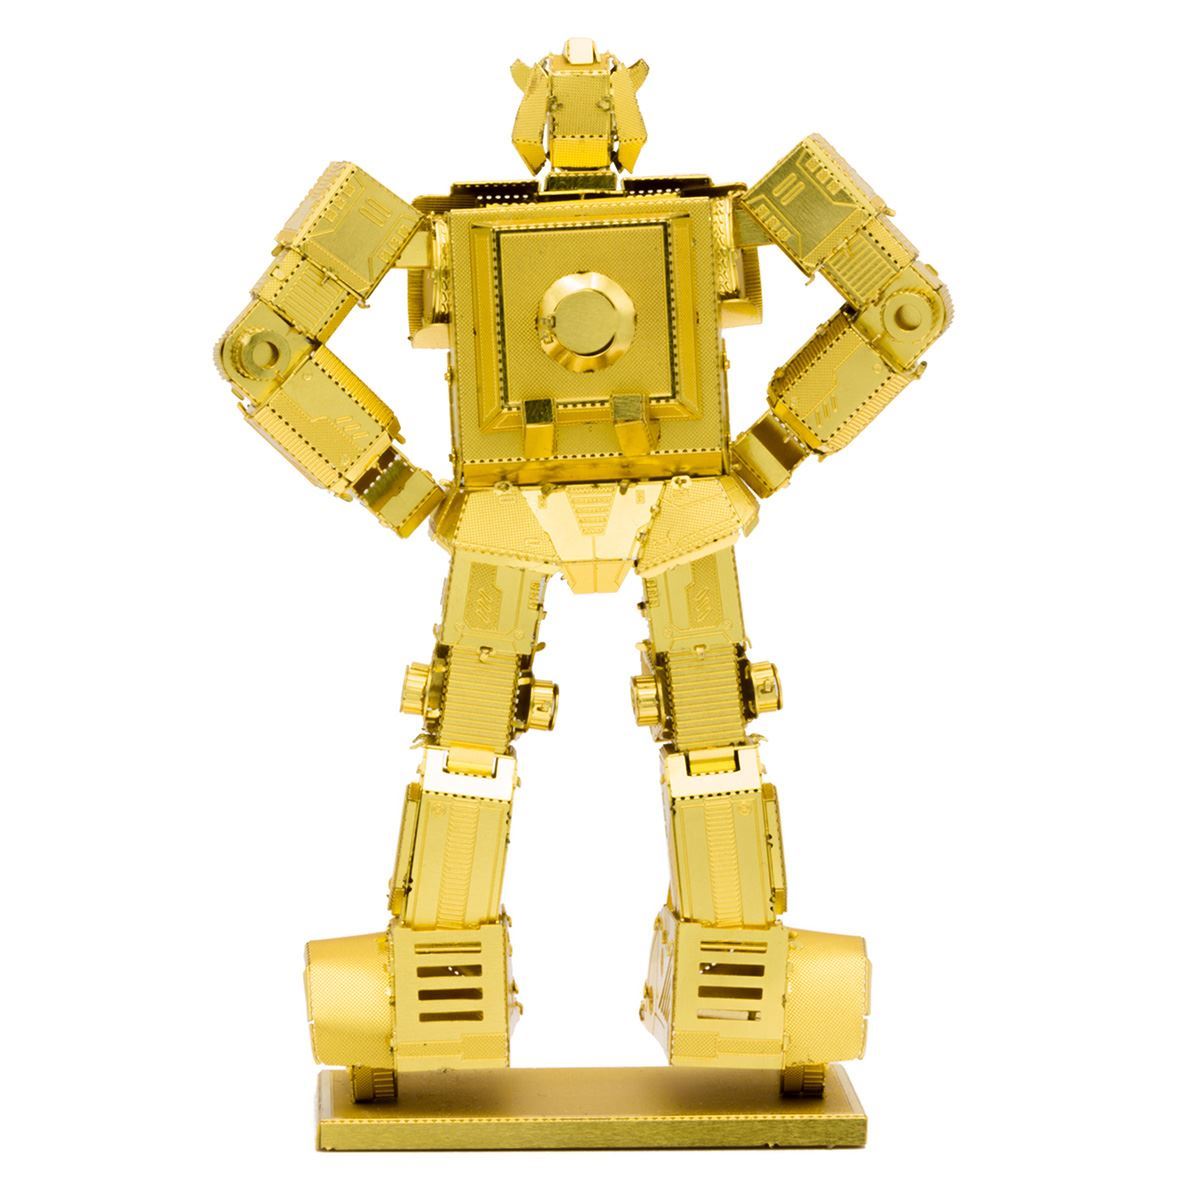 Transformers Gold Bumblebee 3D Laser Cut Metal Earth Puzzle by Fascinations 